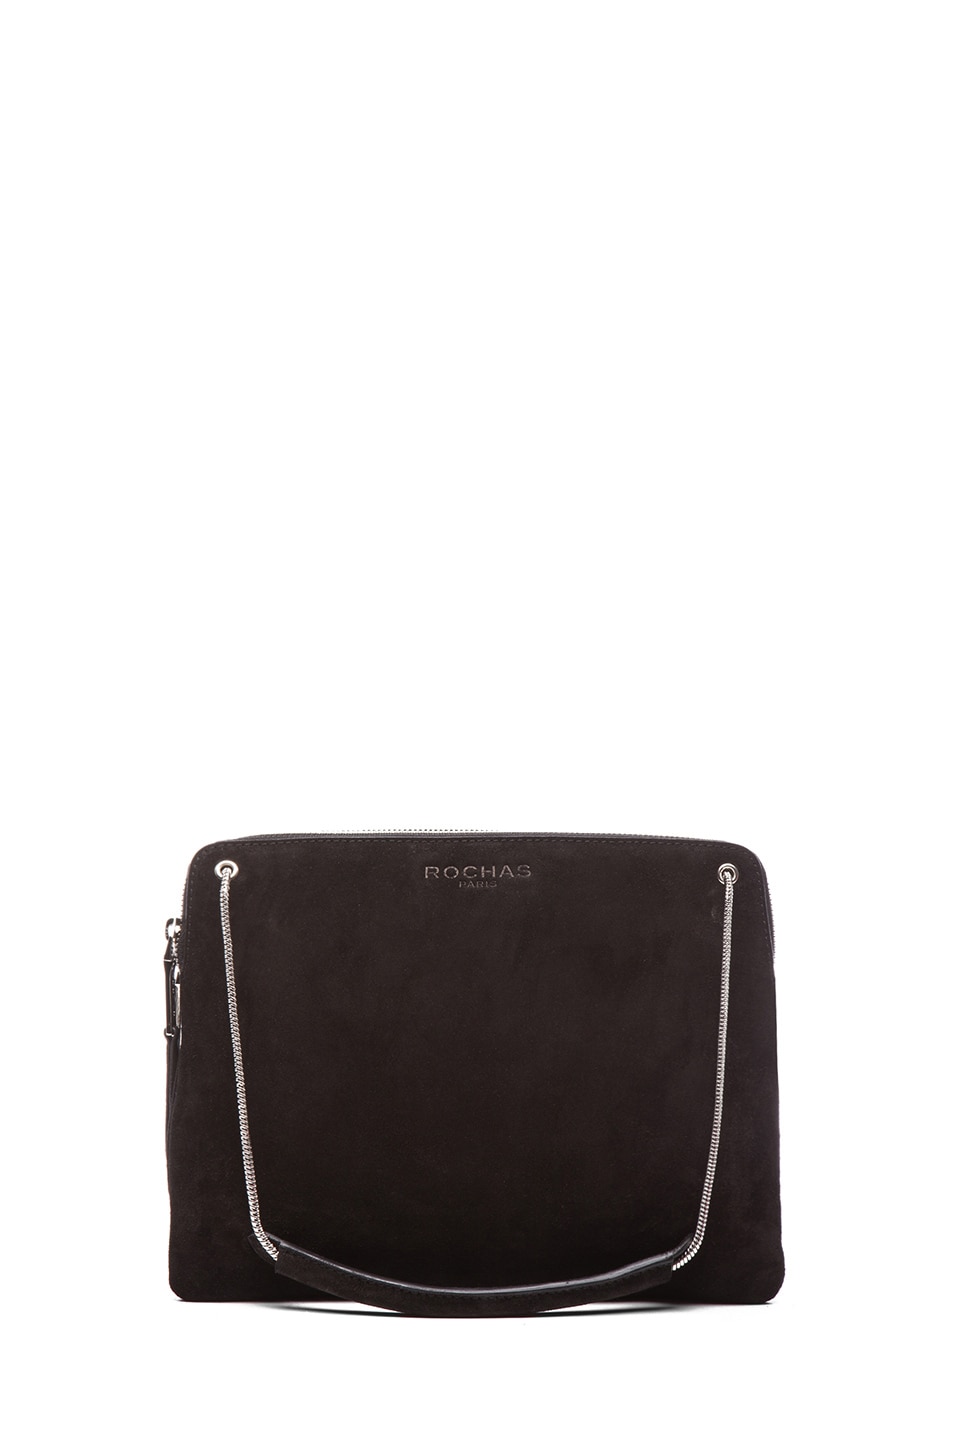 Image 1 of ROCHAS Small Borsa Suede Clutch in Black